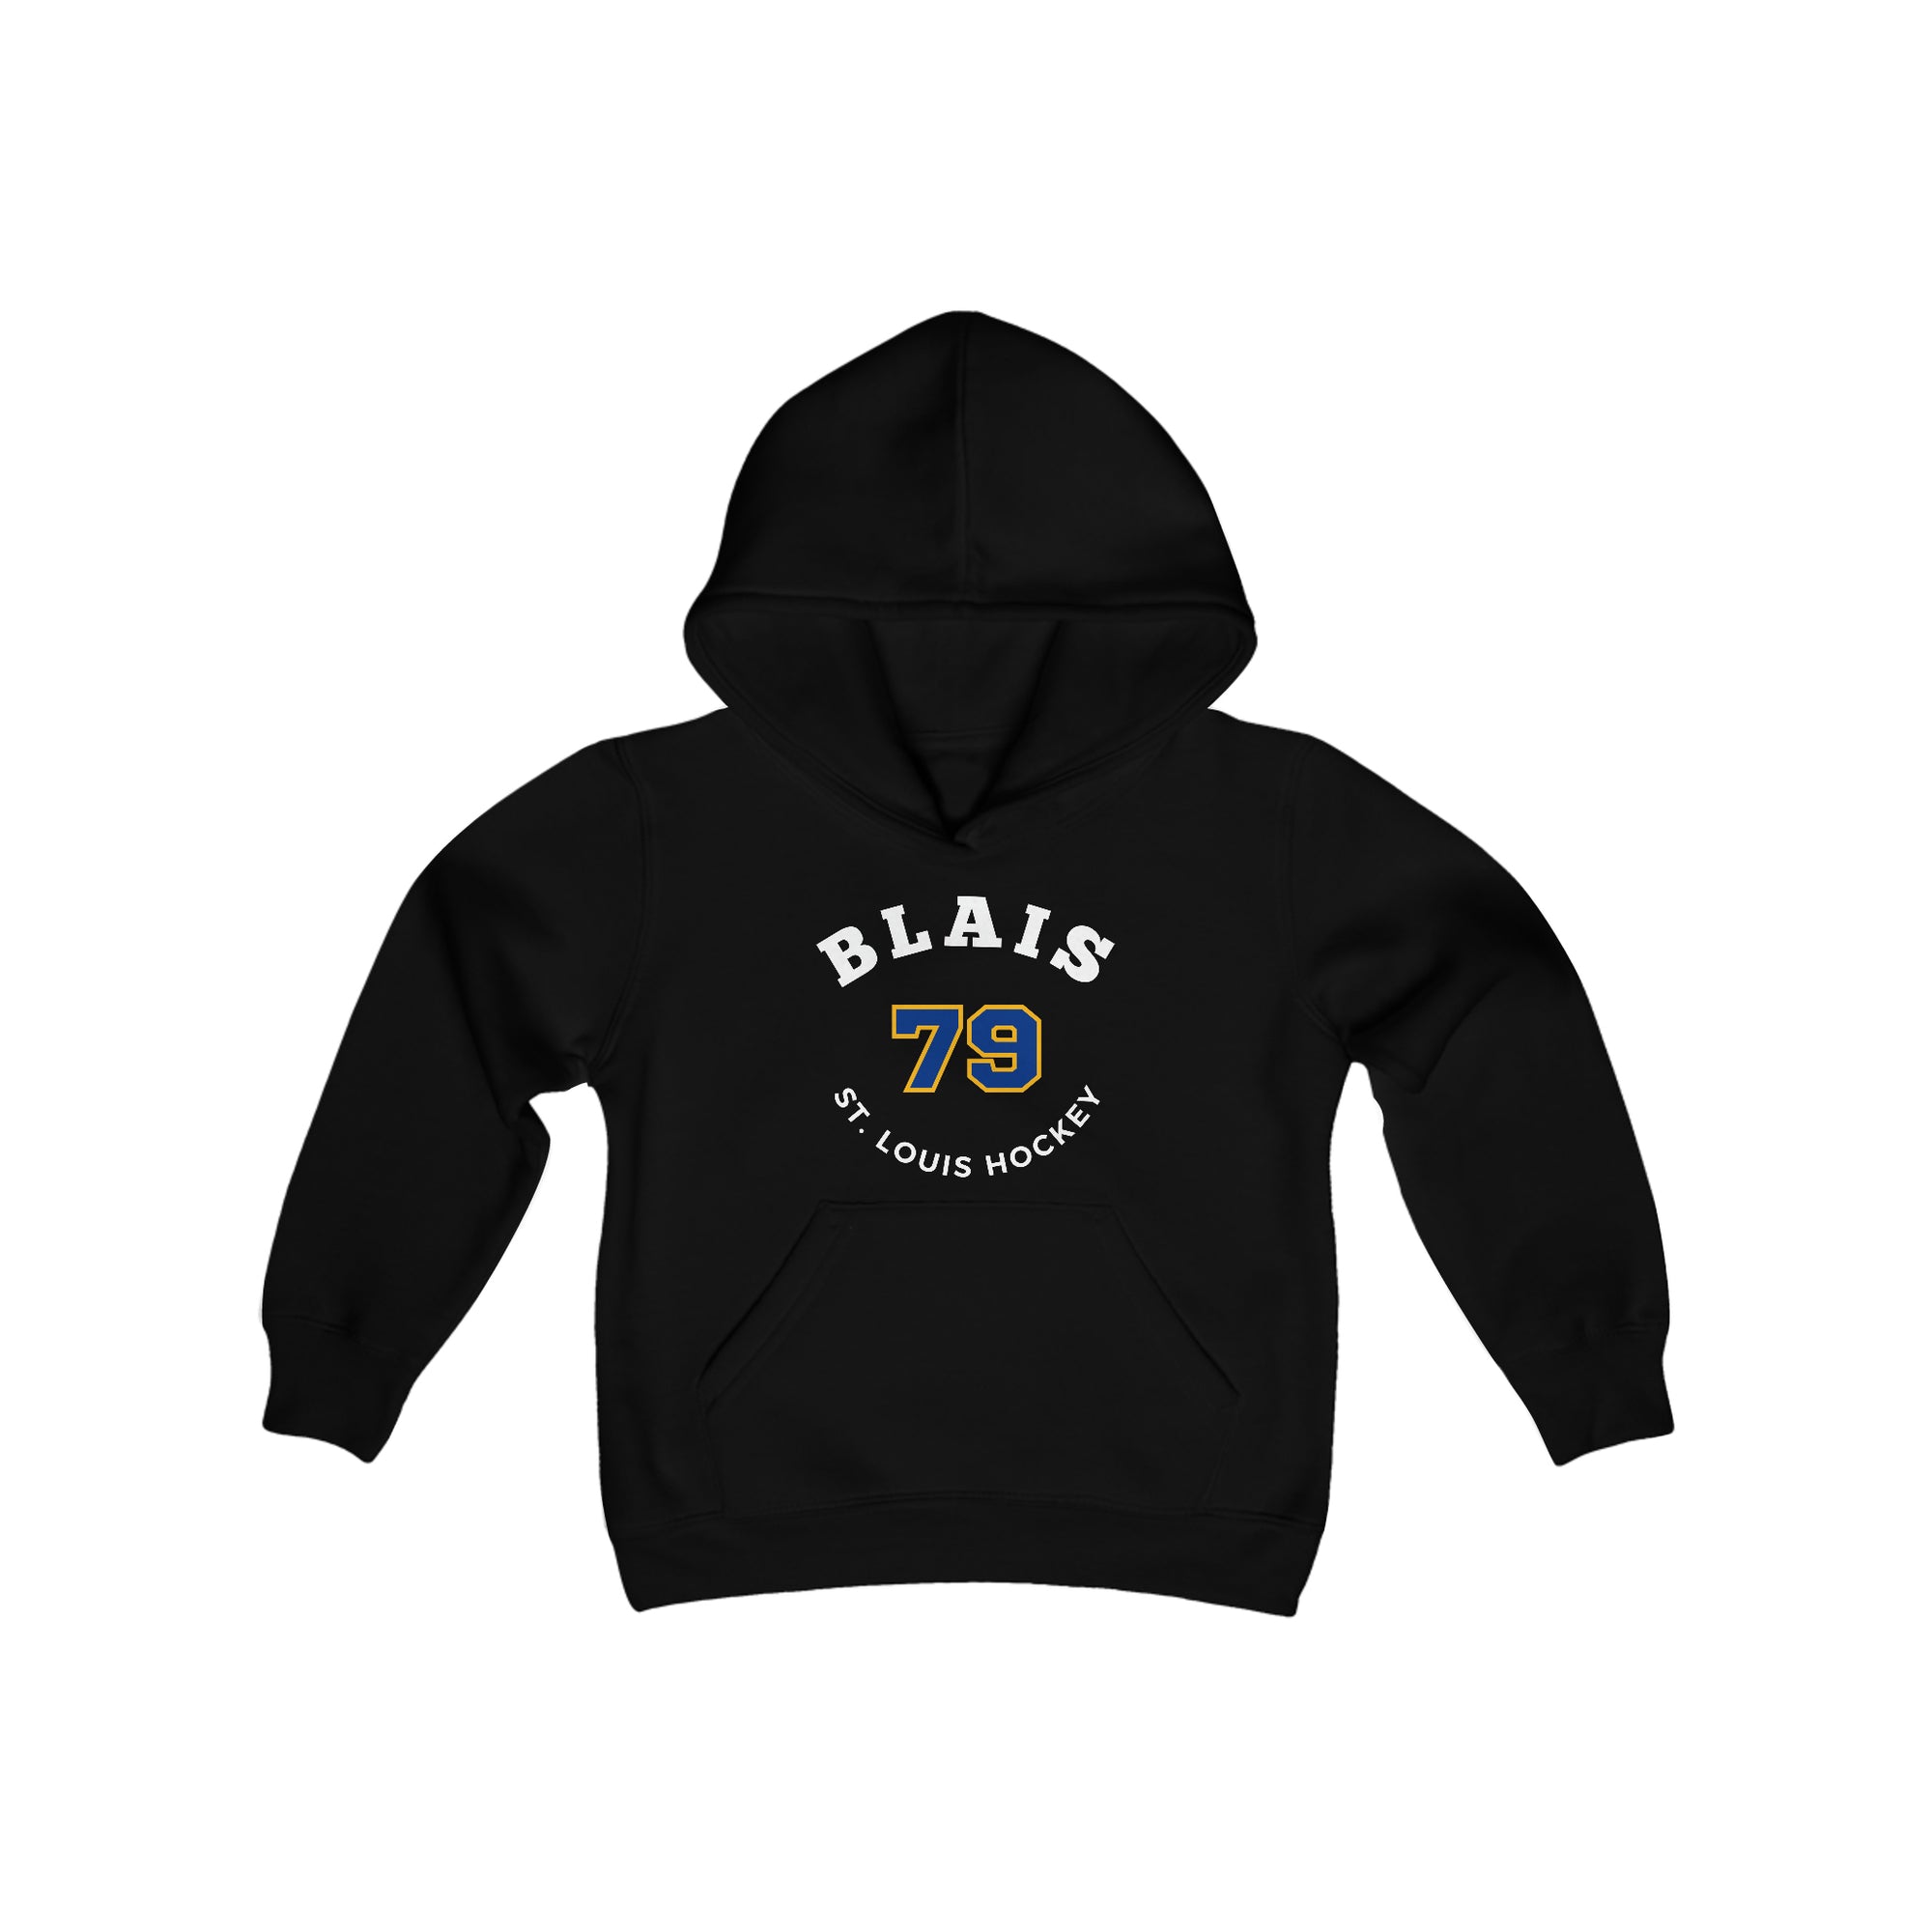 Blais 79 St. Louis Hockey Number Arch Design Youth Hooded Sweatshirt